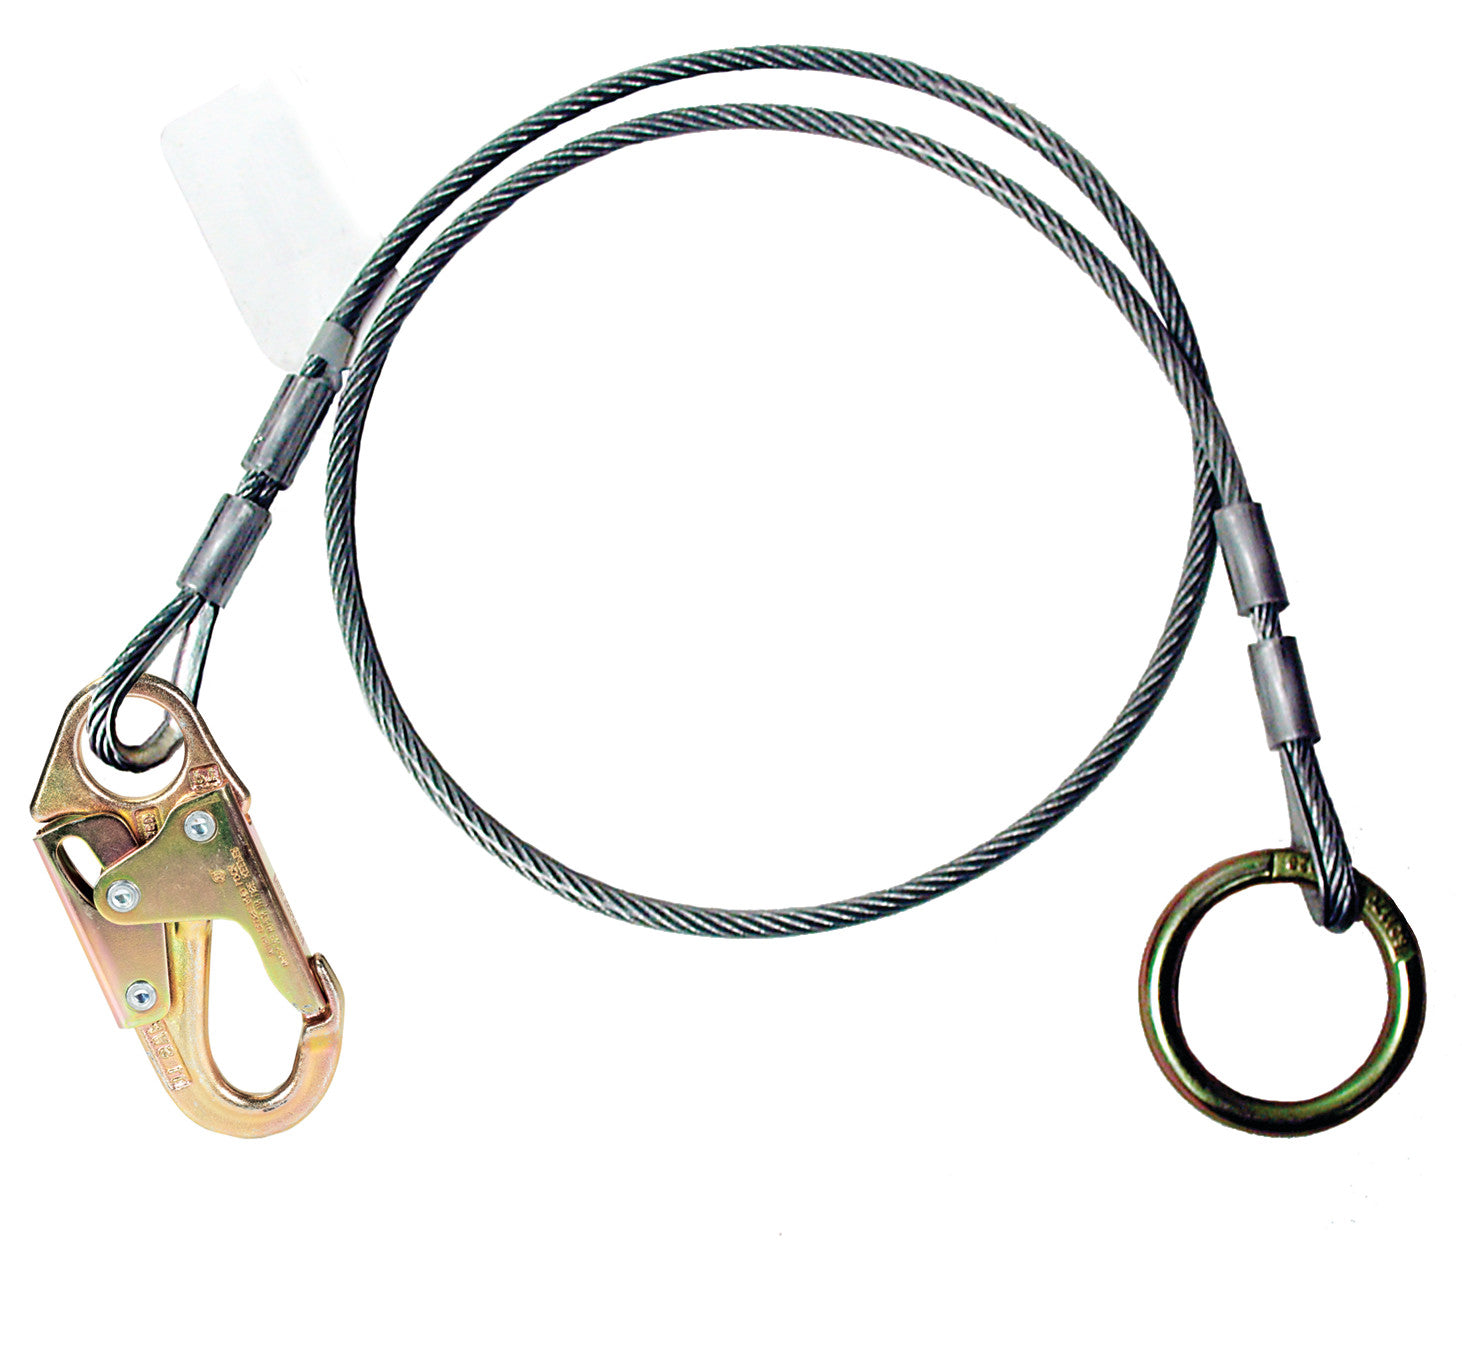 Anchorage Connector Extension, 10' Cable,36 c Snaphook snaphook & O-Ring